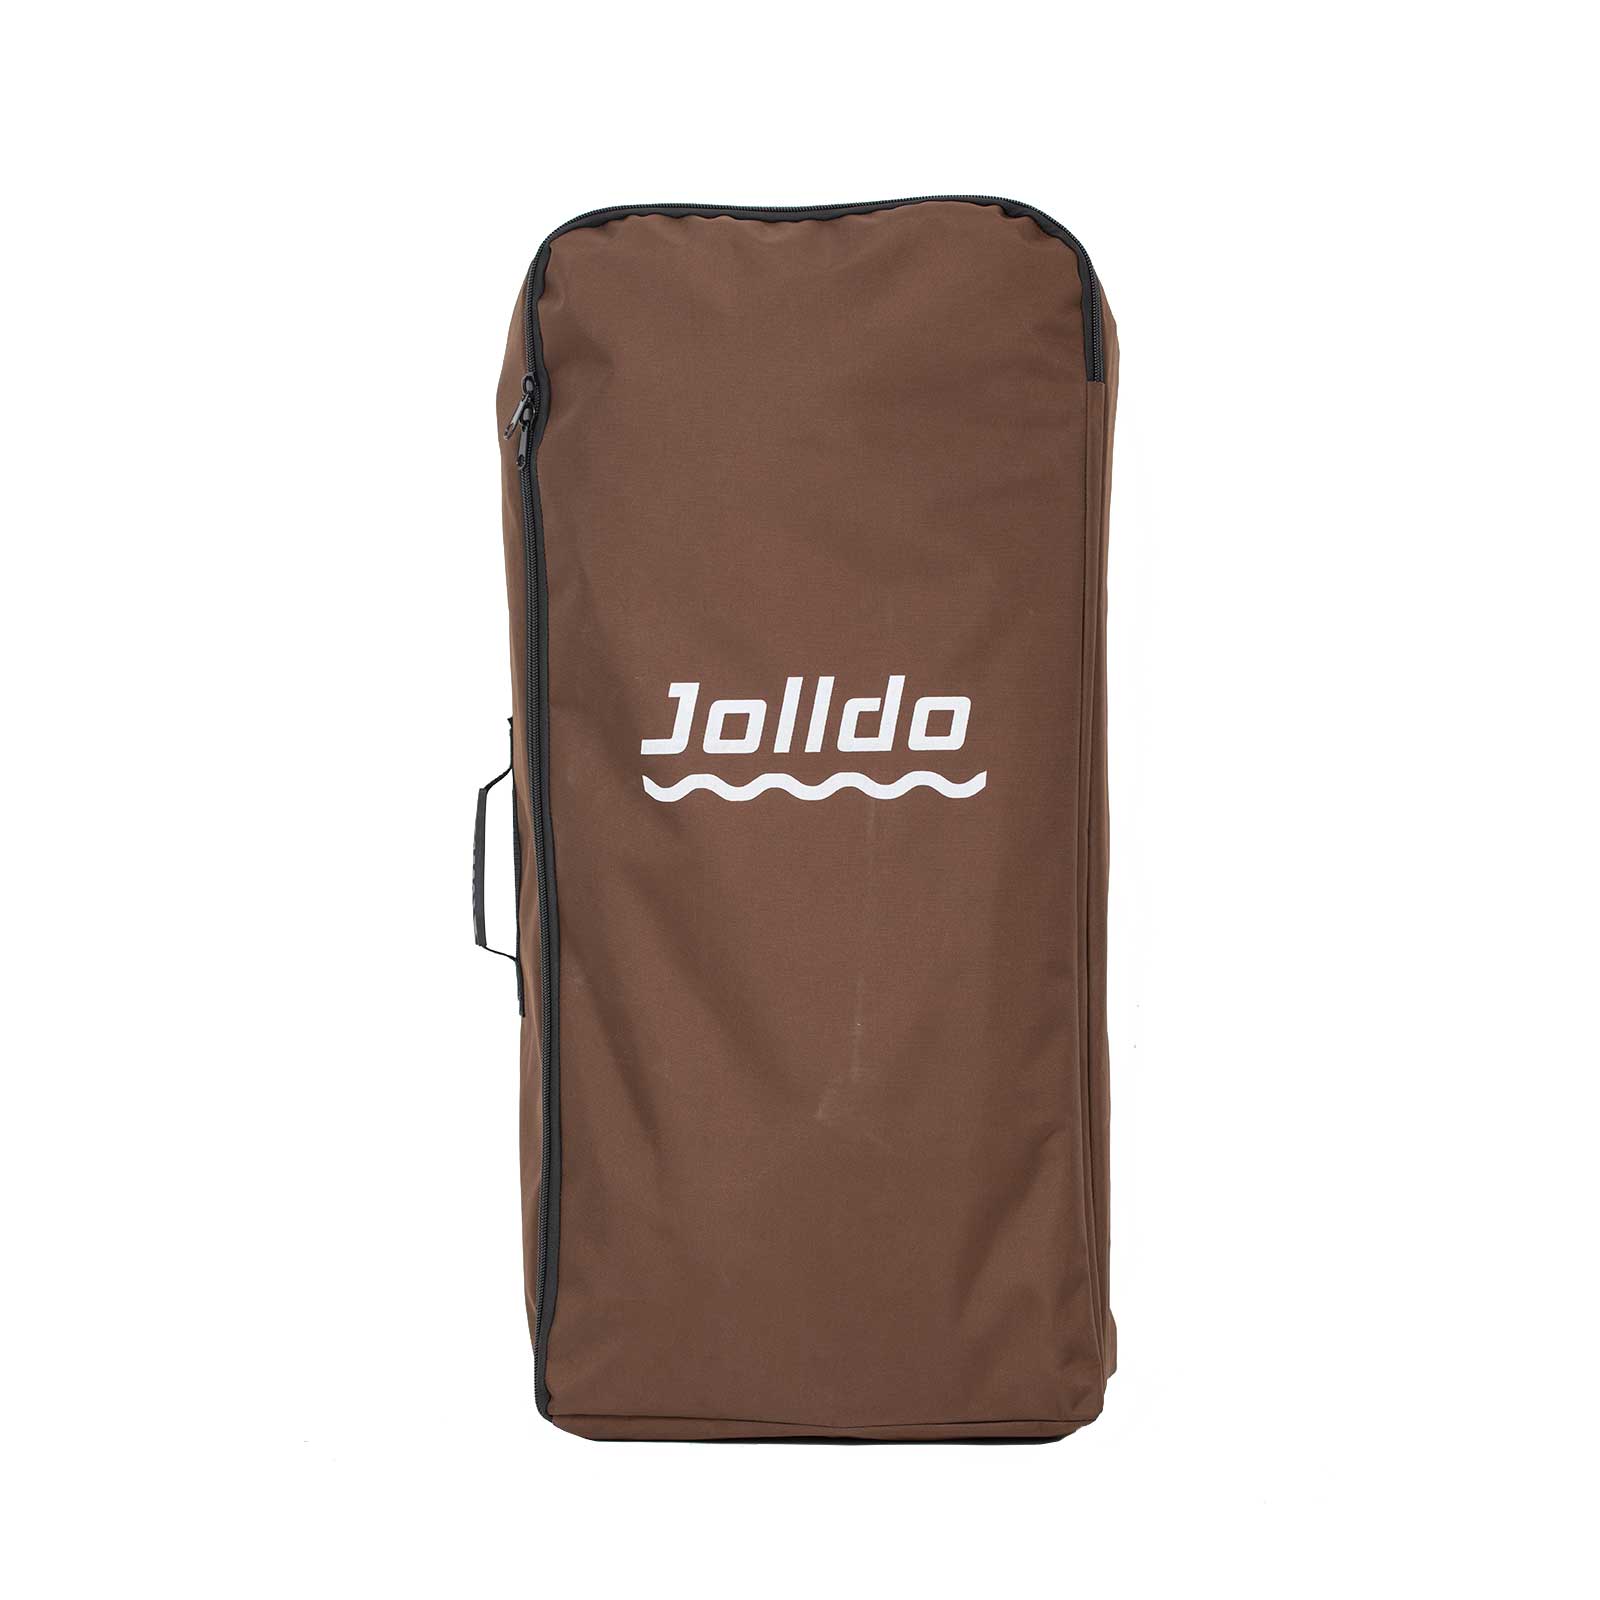 Jolldo Inflatable Paddle Board Backpack